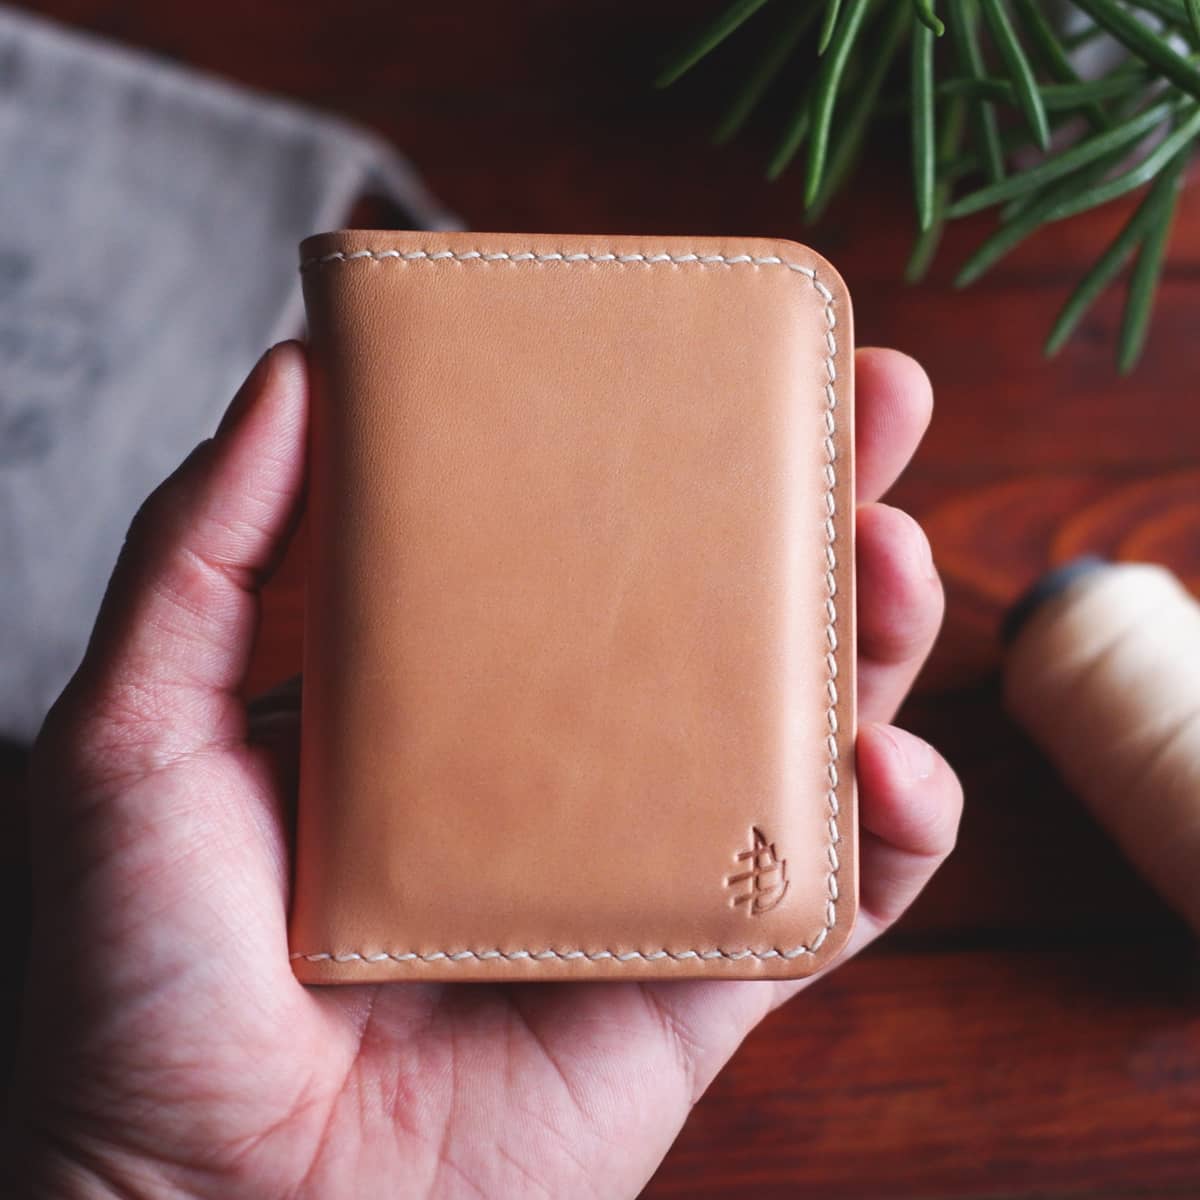 The Mountain Bifold wallet in Natural Vachetta held in hand